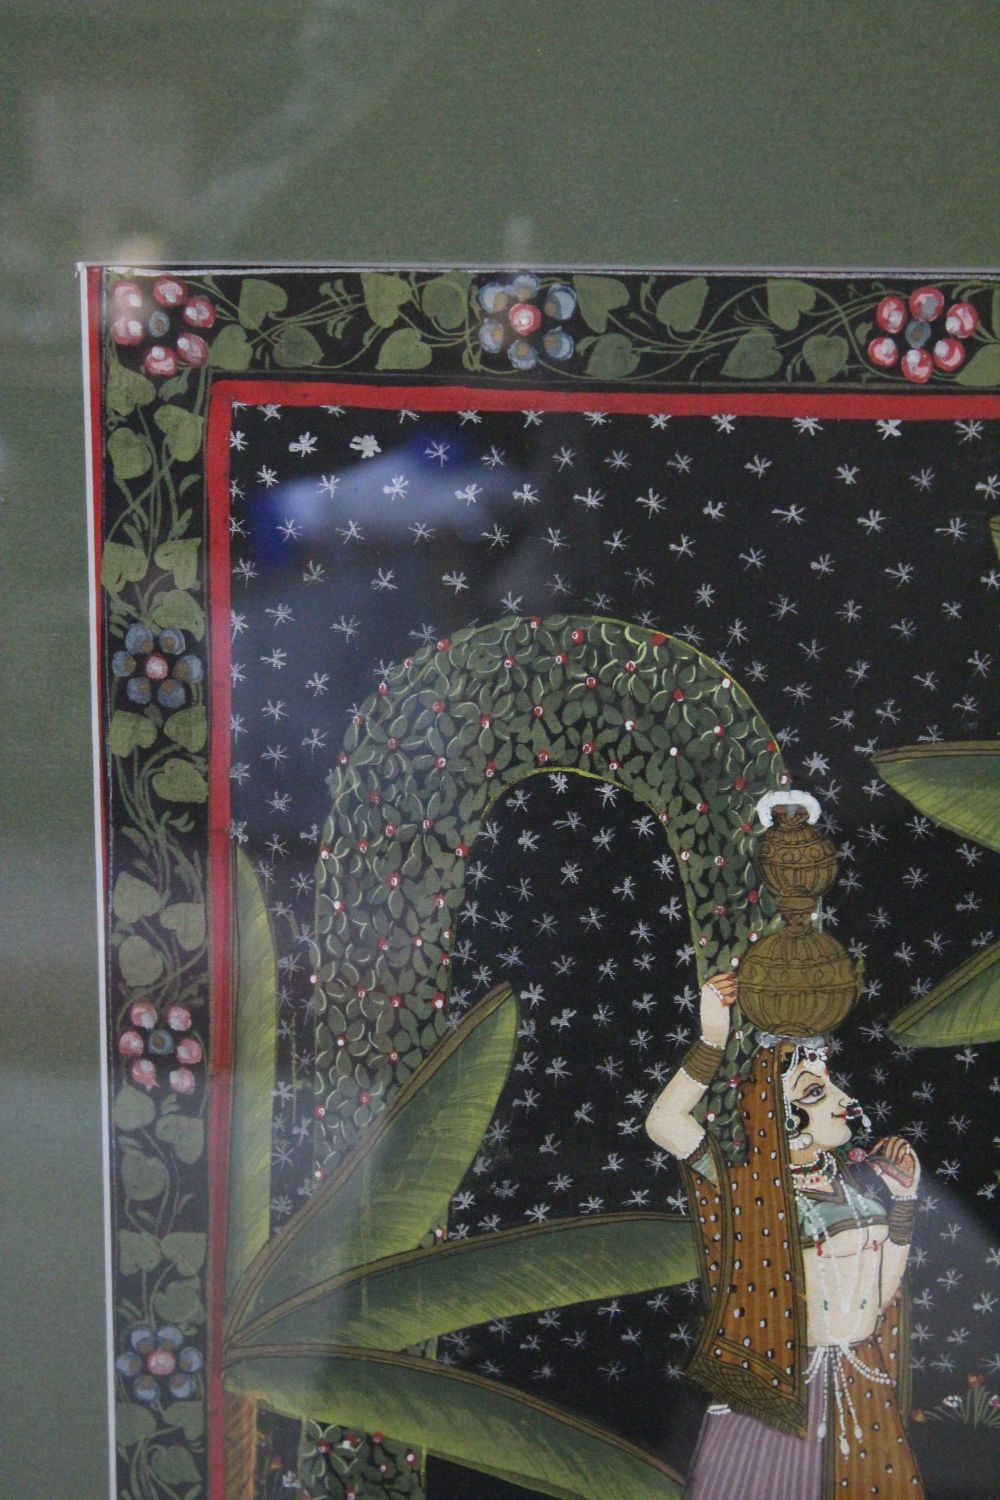 A LARGE FRAMED ISLAMIC / INDIAN PAINTING ON TEXTILE, depicting a blue skin god mid parade or - Image 8 of 8